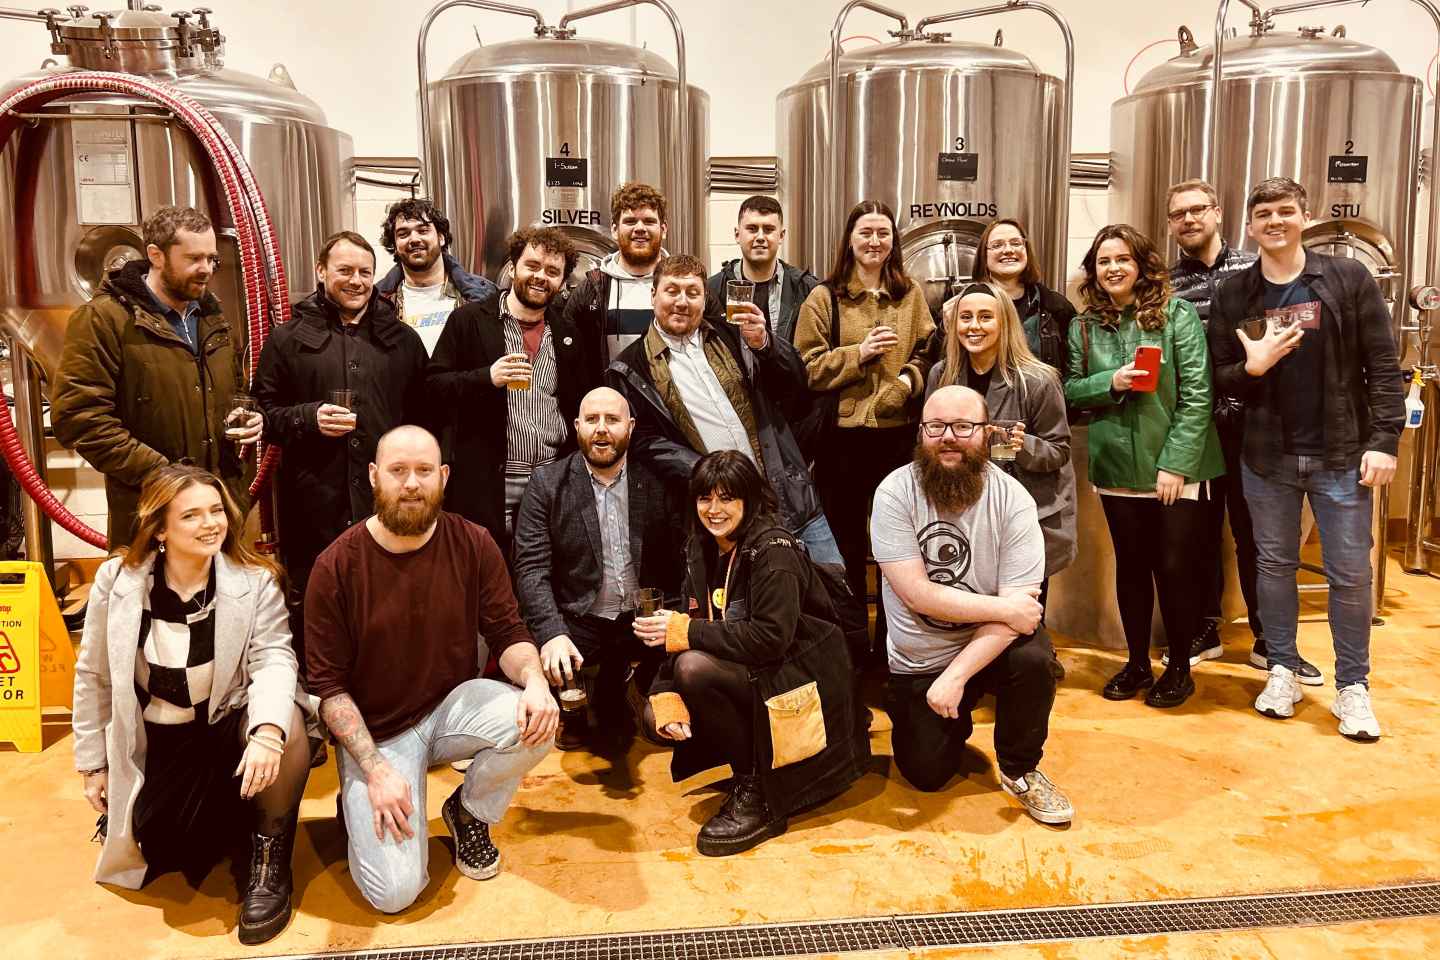 Liverpool: Brewery Bus Tour, 5 breweries, 12 beers, 1 pizza